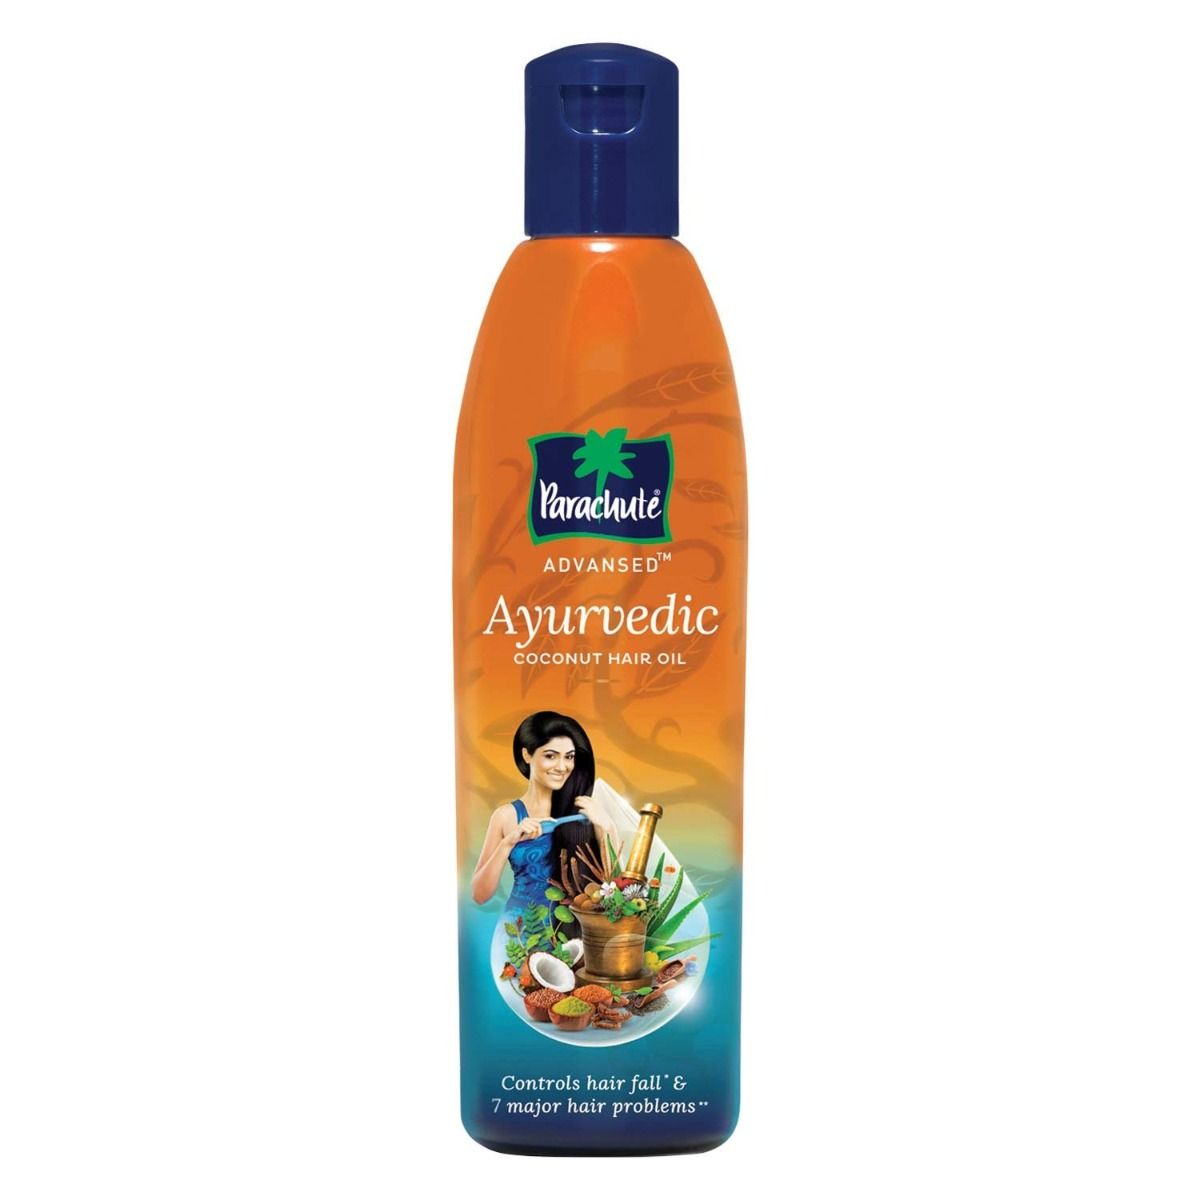 Parachute Advansed Ayurvedic Coconut Hair Oil, 95 ml Price, Uses, Side  Effects, Composition - Apollo Pharmacy